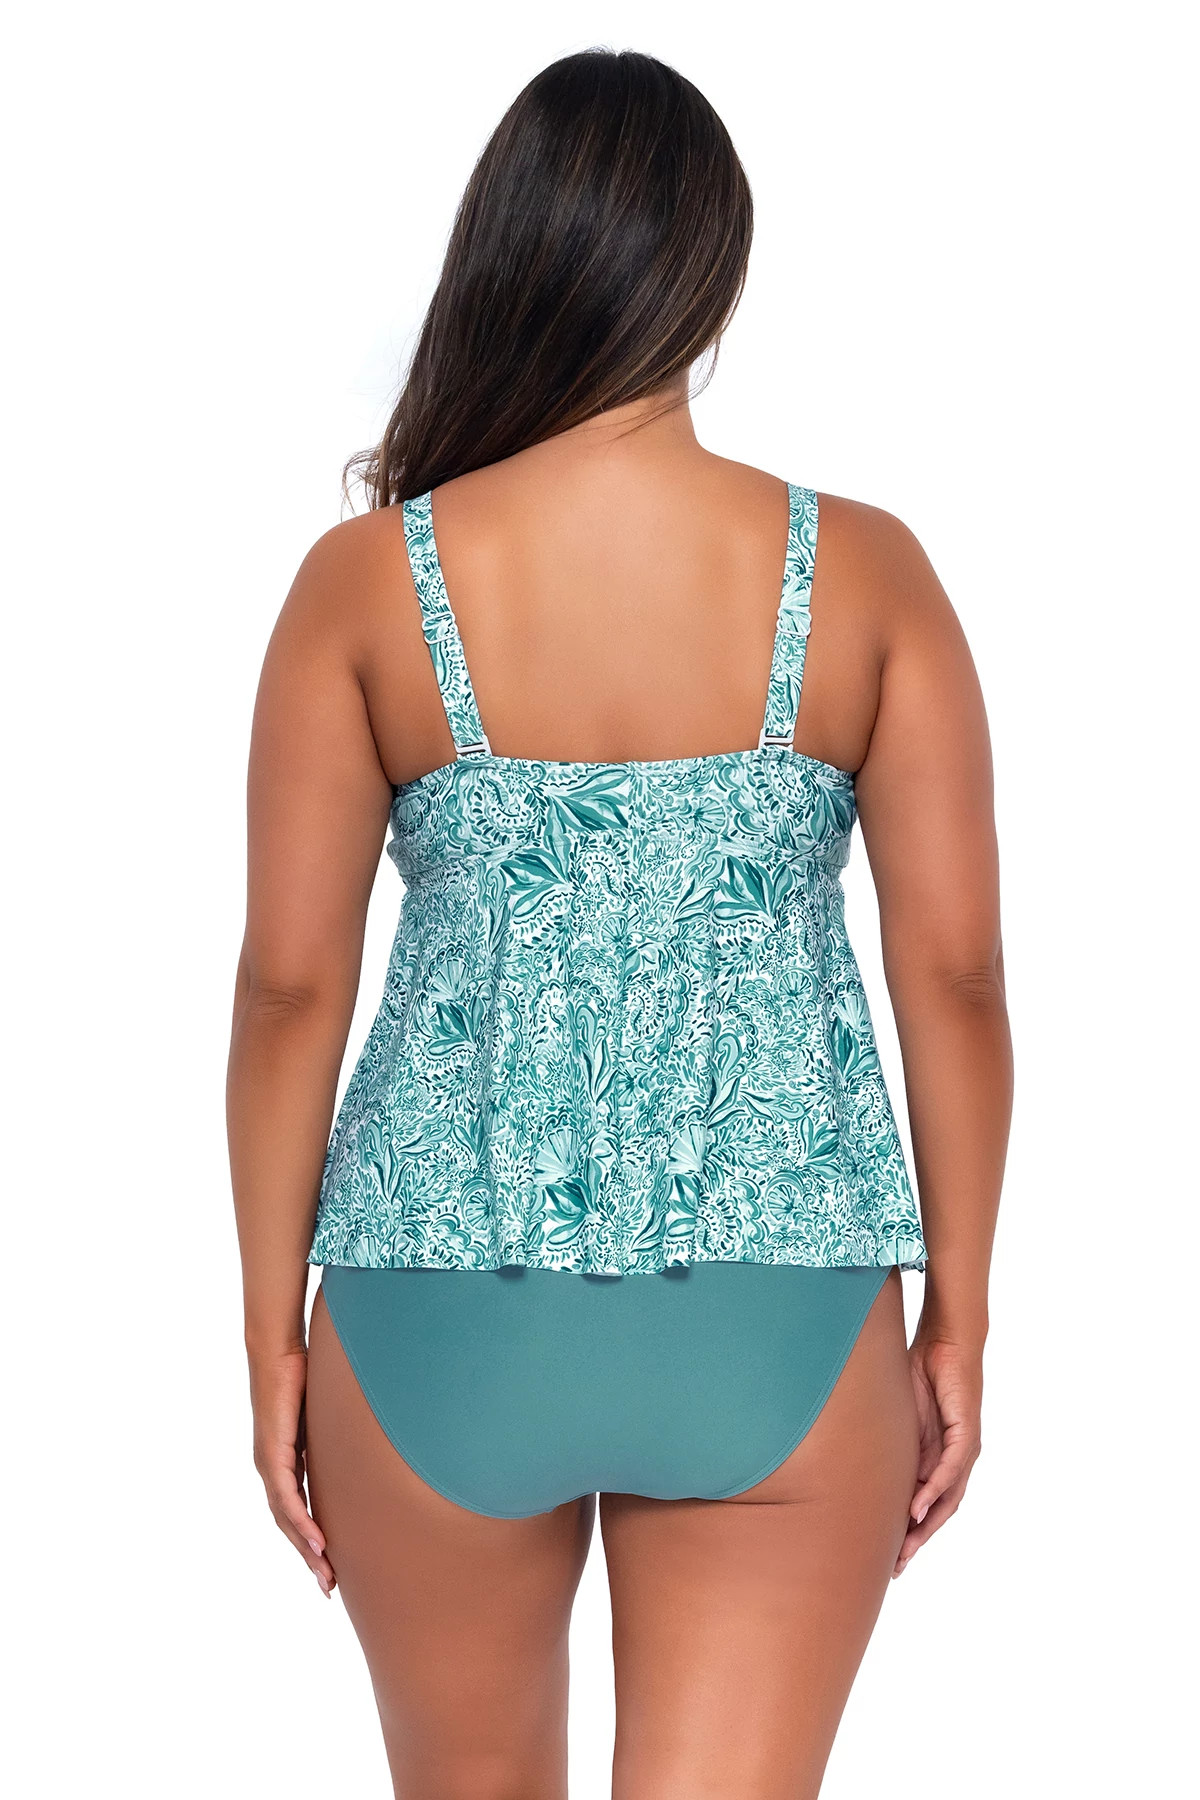 BY THE SEA Marin Tankini Top image number 2